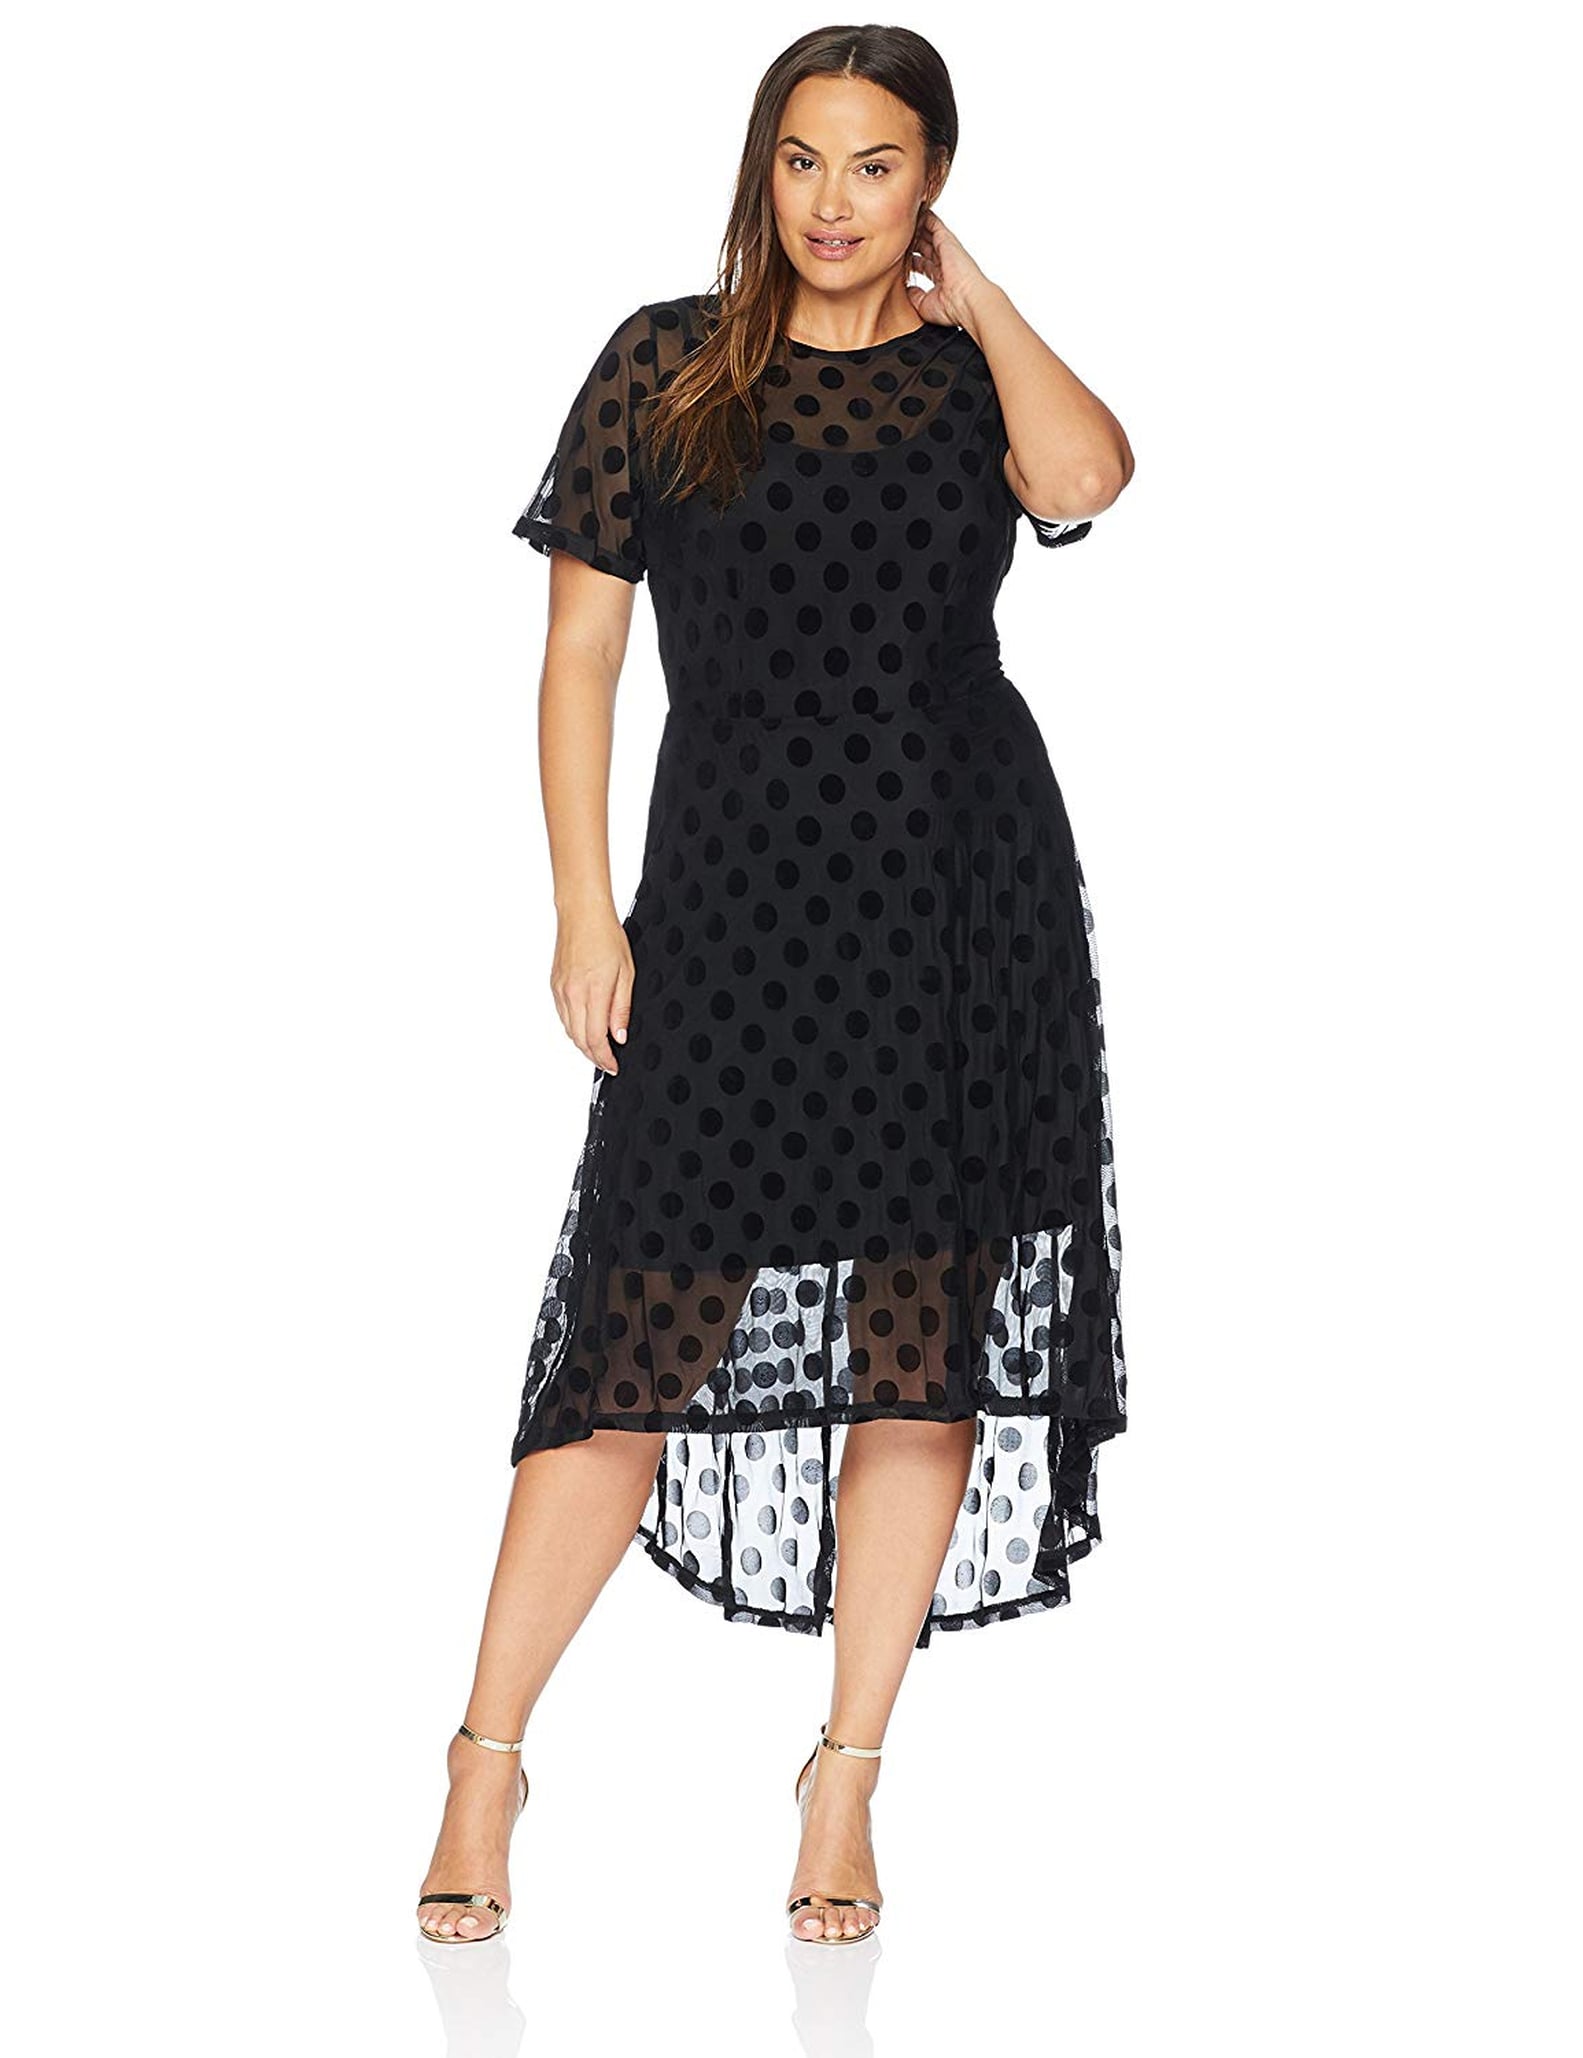 These are the Best Plus-Size Dresses on Amazon | POPSUGAR Fashion